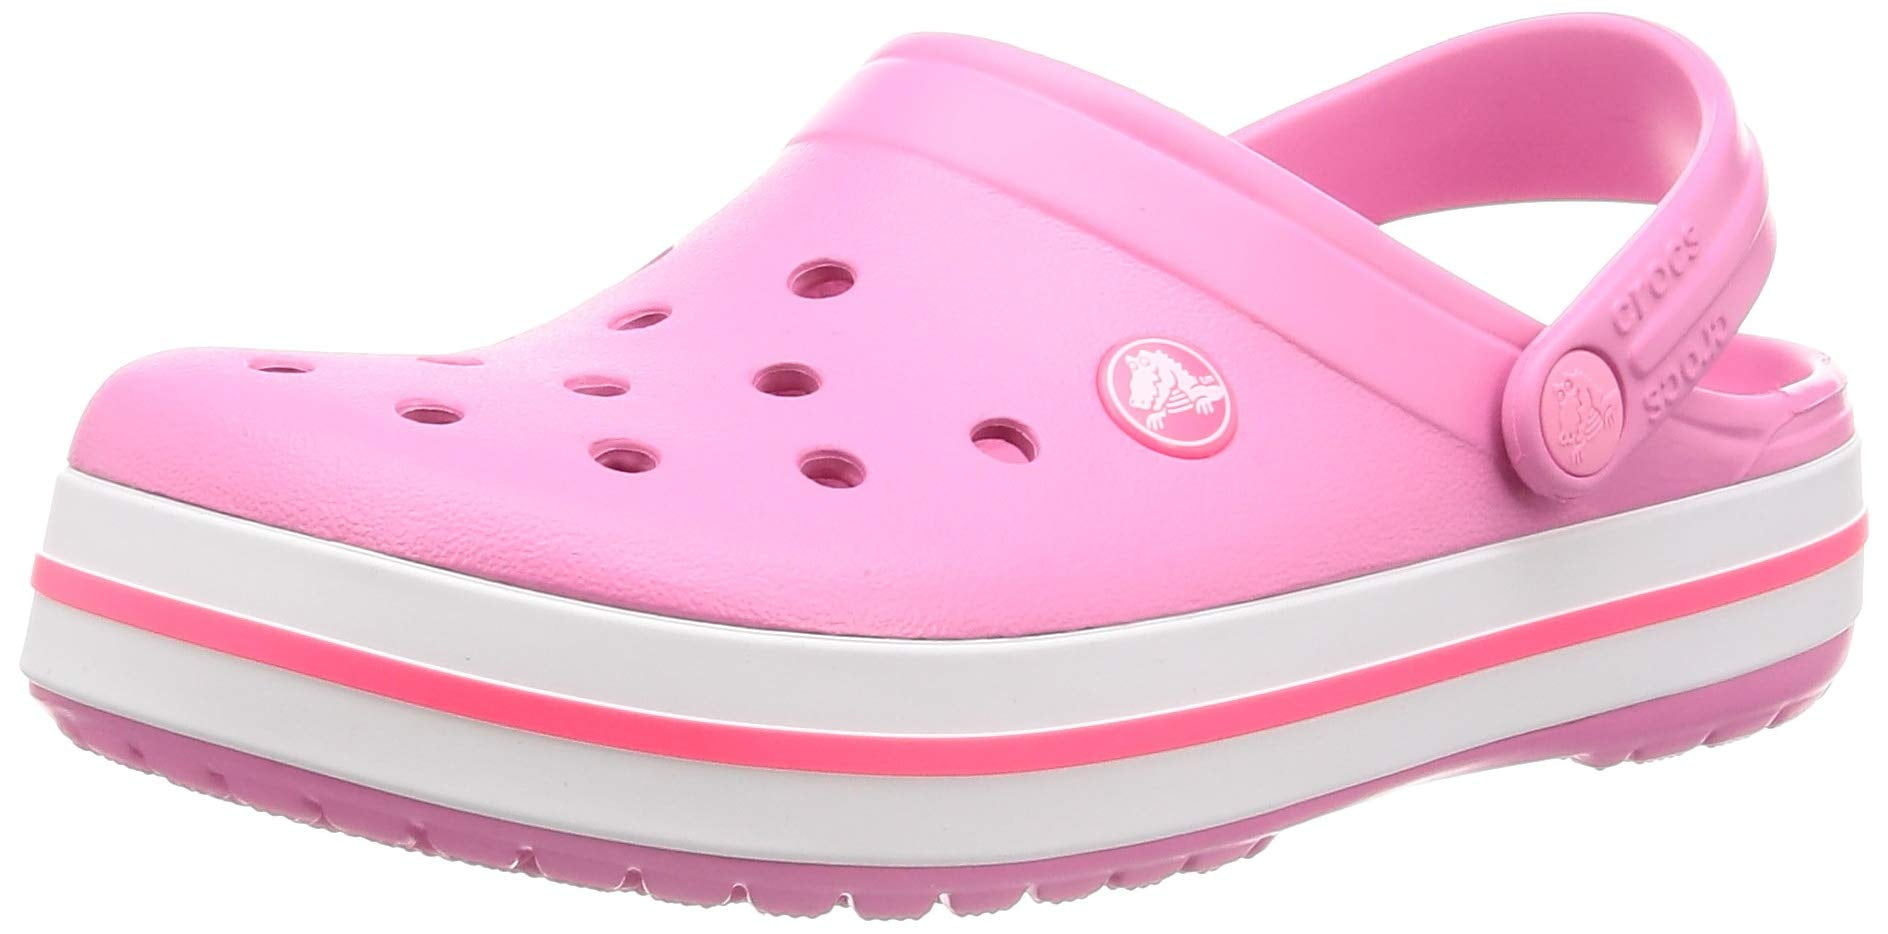 Crocs Crocband Clogs Ice Blue/White/Pink beach shoes various sizes 